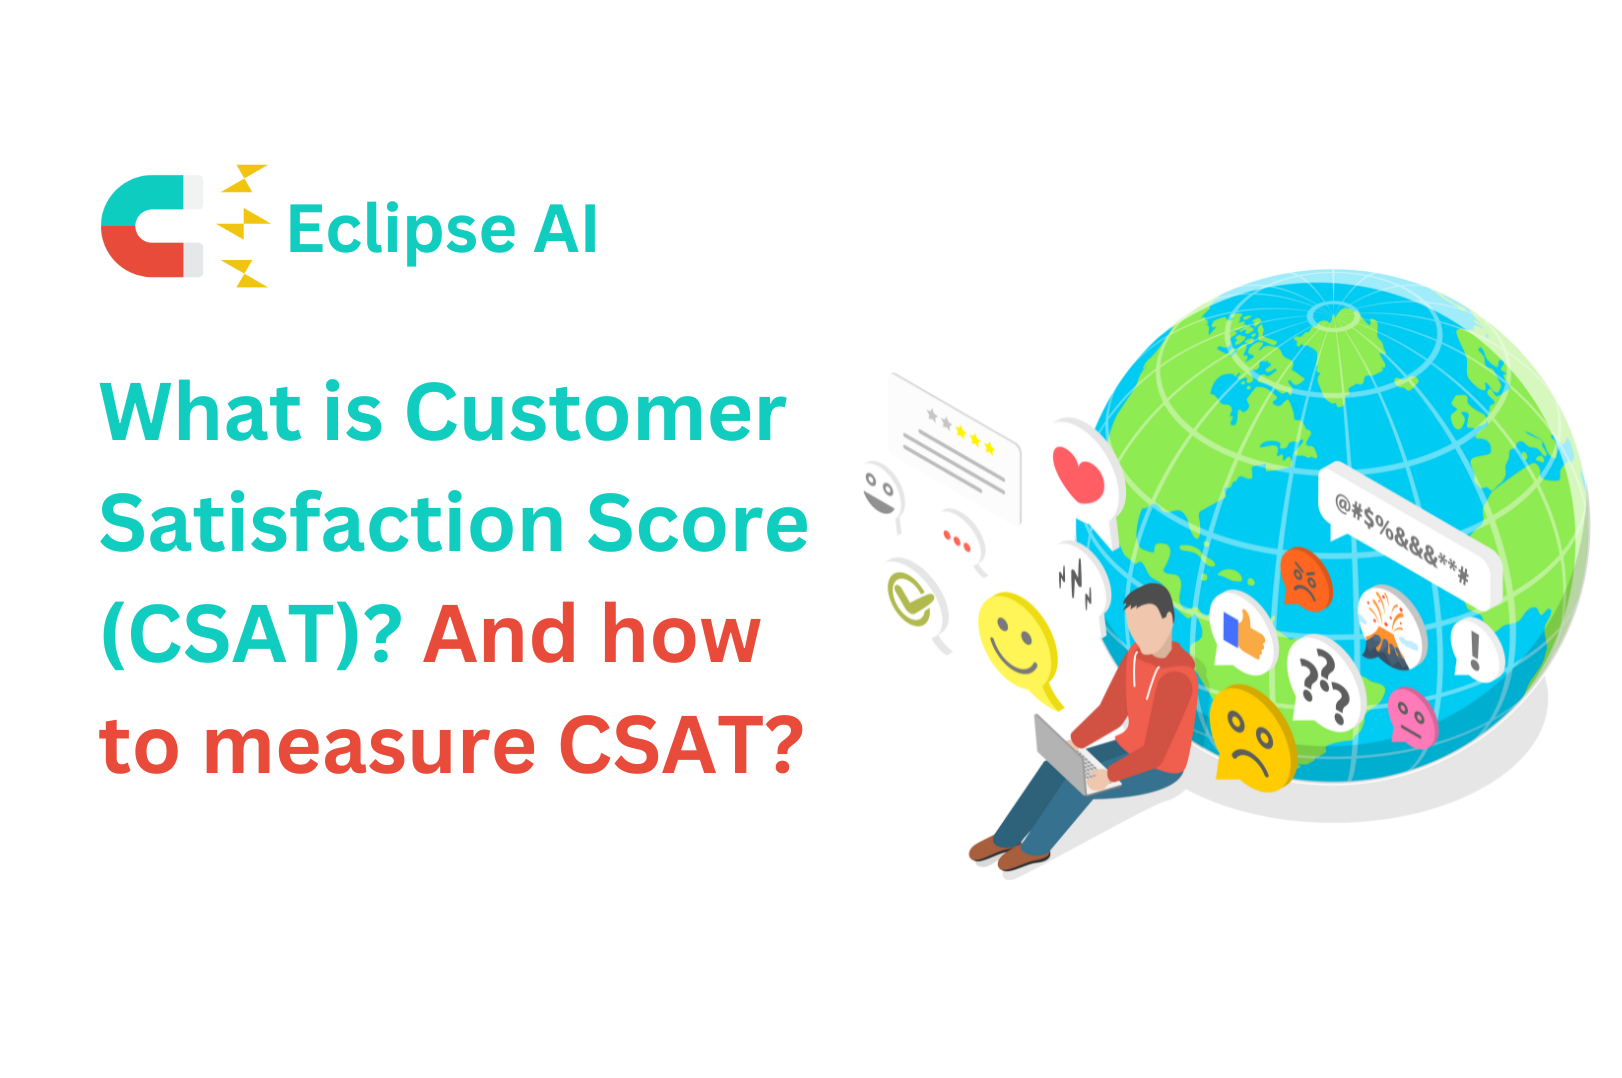 What is Customer Satisfaction Score (CSAT)? And how to measure CSAT?